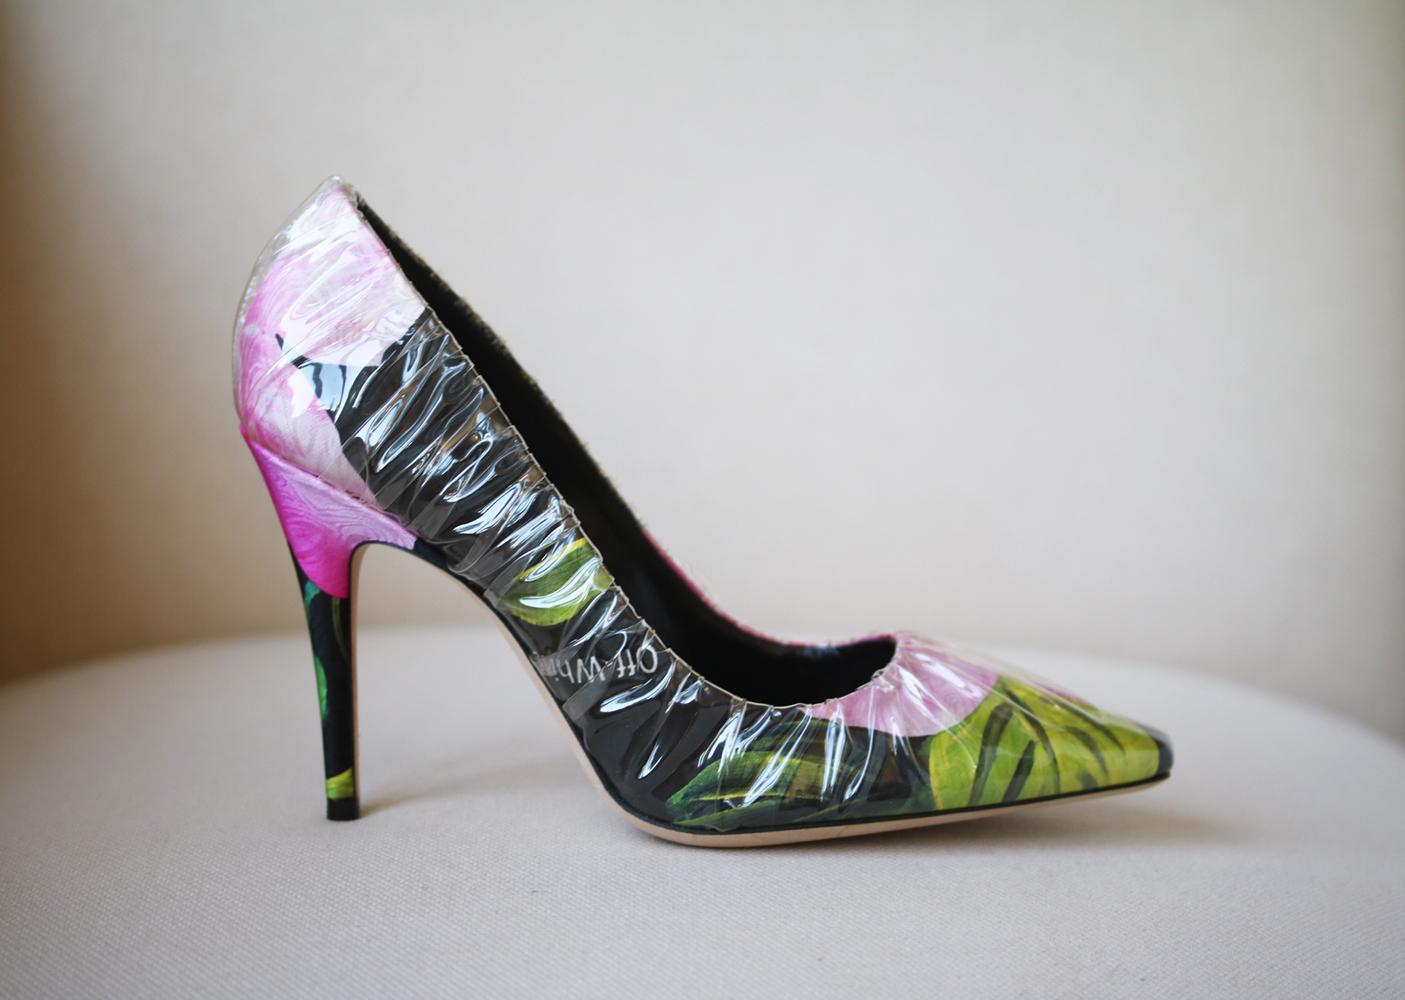 Dedicated to Princess Diana's enduring style and elegance, these 'Anne' pumps have been made in Italy from black satin printed with hothouse florals, then wrapped in clear PVC to resemble glass slippers. Heel measures approximately 100mm/ 4 inches.